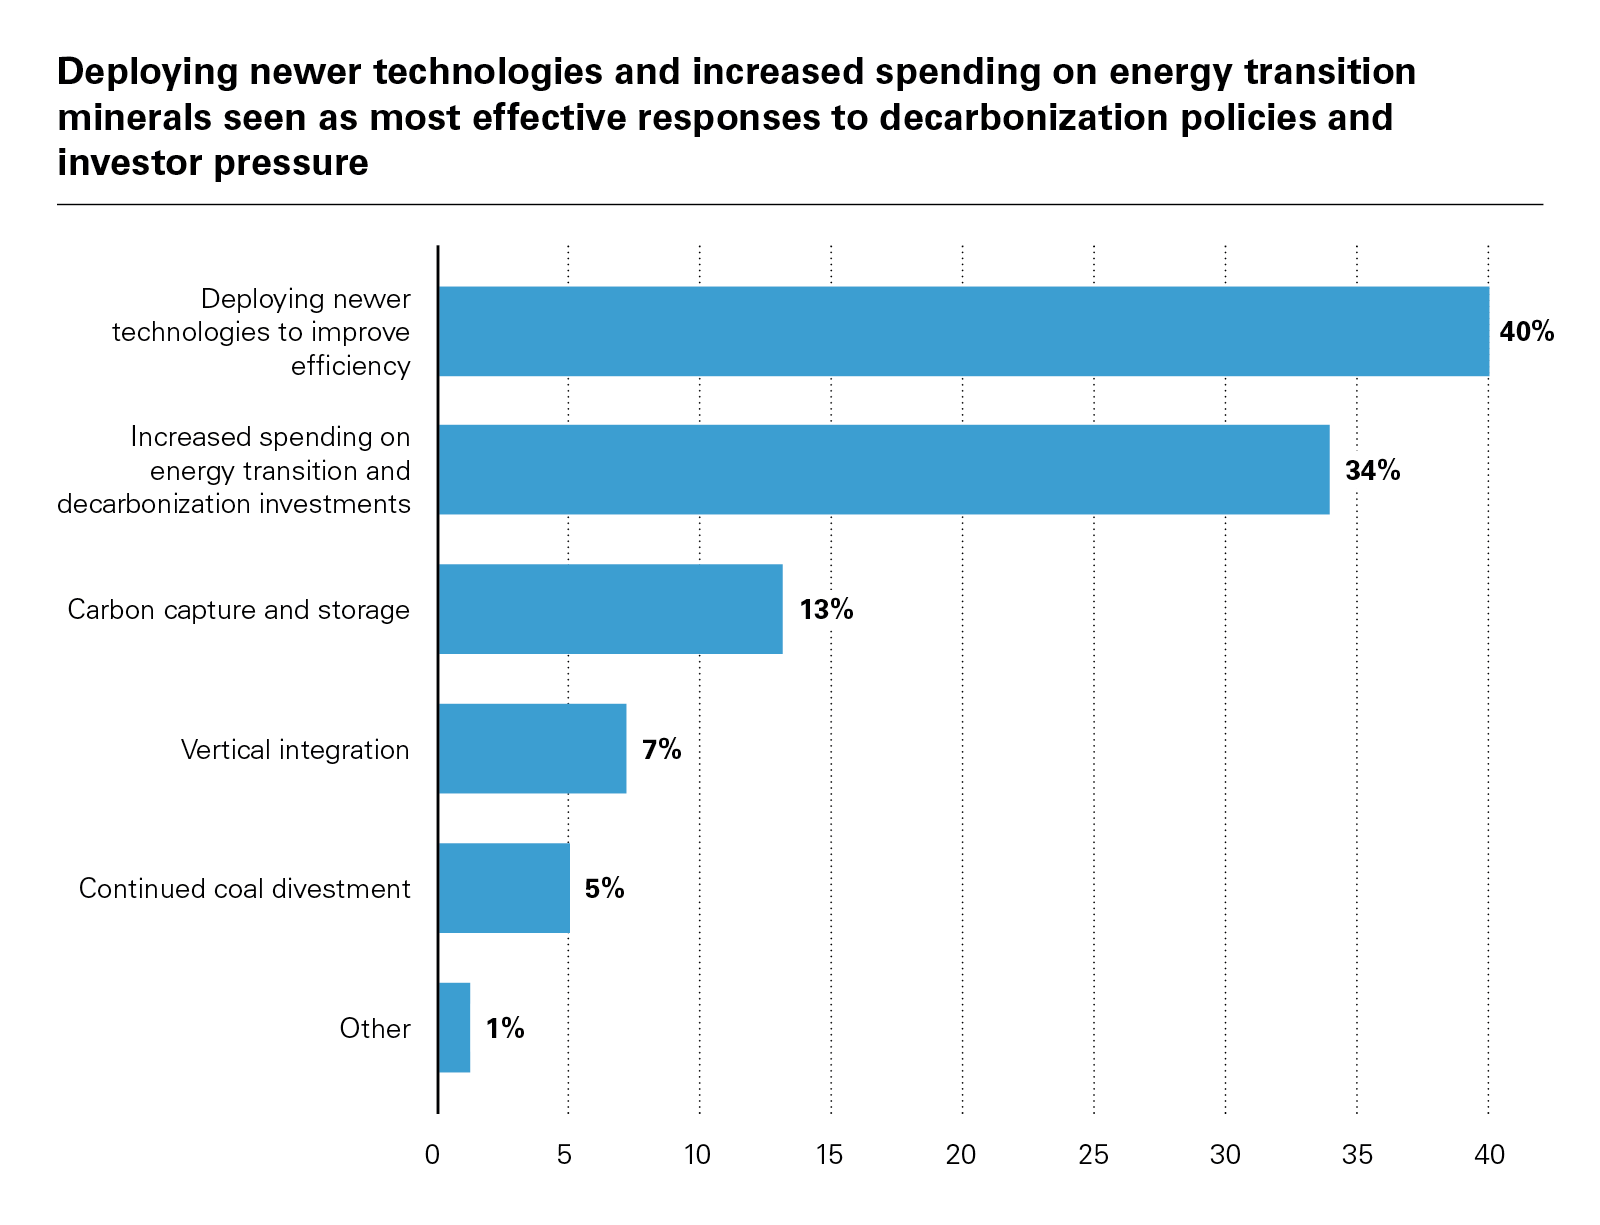 Deploying newer technologies and increased spending on energy transition minerals seen as most effective responses to decarbonization policies and investor pressure